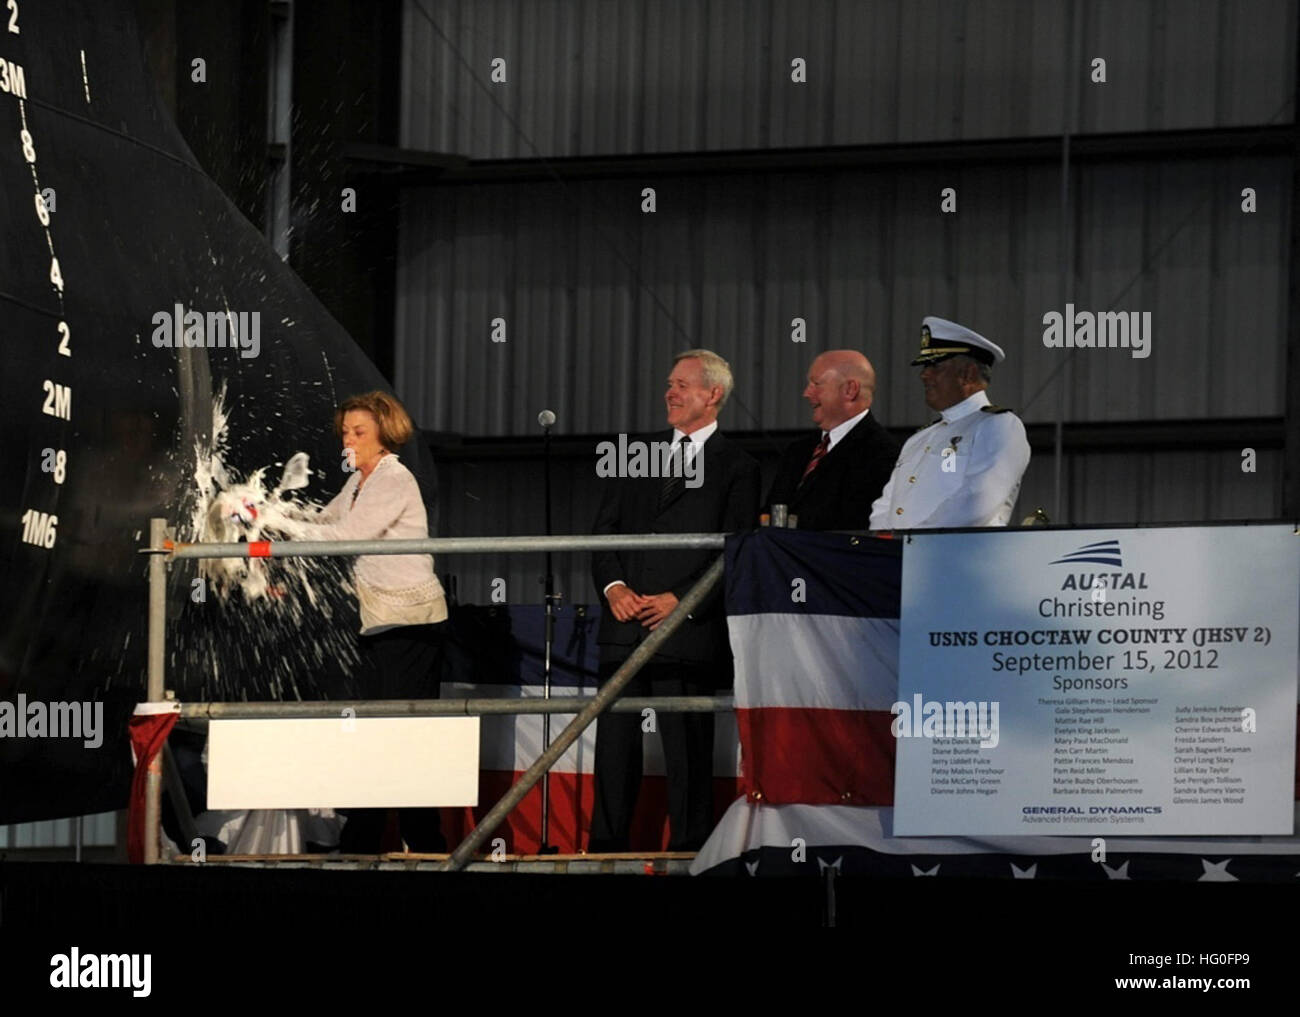 Theresa Gilliam Pitts, Sponsor of the Joint High Speed Vessel (JHSV) 2, USNS Choctaw County, breaks a bottle of champagne during the christening at  the Austal Shipyard. Secretary of the Navy Ray Mabus named the ship after three U.S. counties located in Mississippi, Alabama and Oklahoma; places he said demonstrate core American values of hard work, putting family first, and community service. (U.S. Navy photo by Chief Mass Communication Specialist Sam Shavers/Released) USNS Choctaw County christening 120915-N-AC887-002 Stock Photo